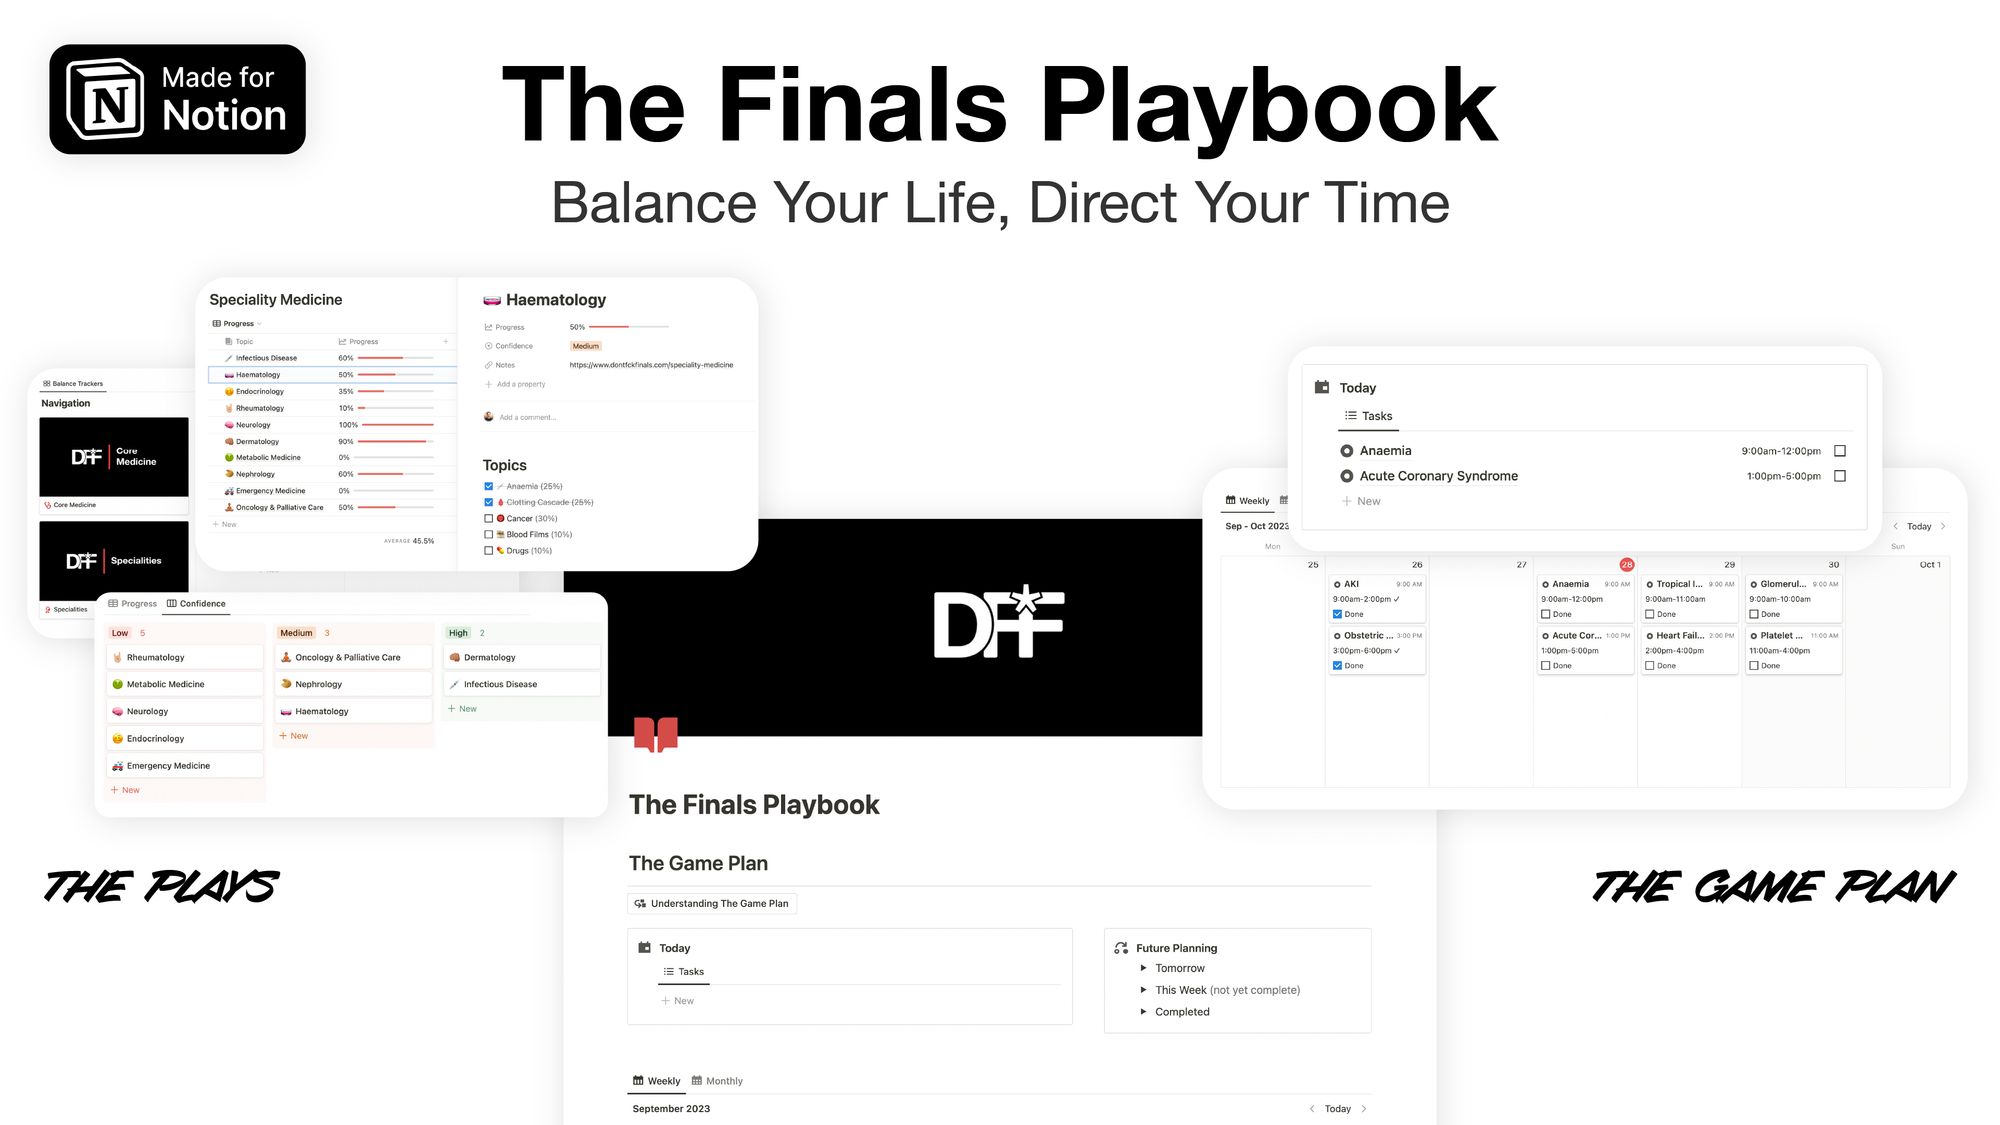 The Finals Playbook